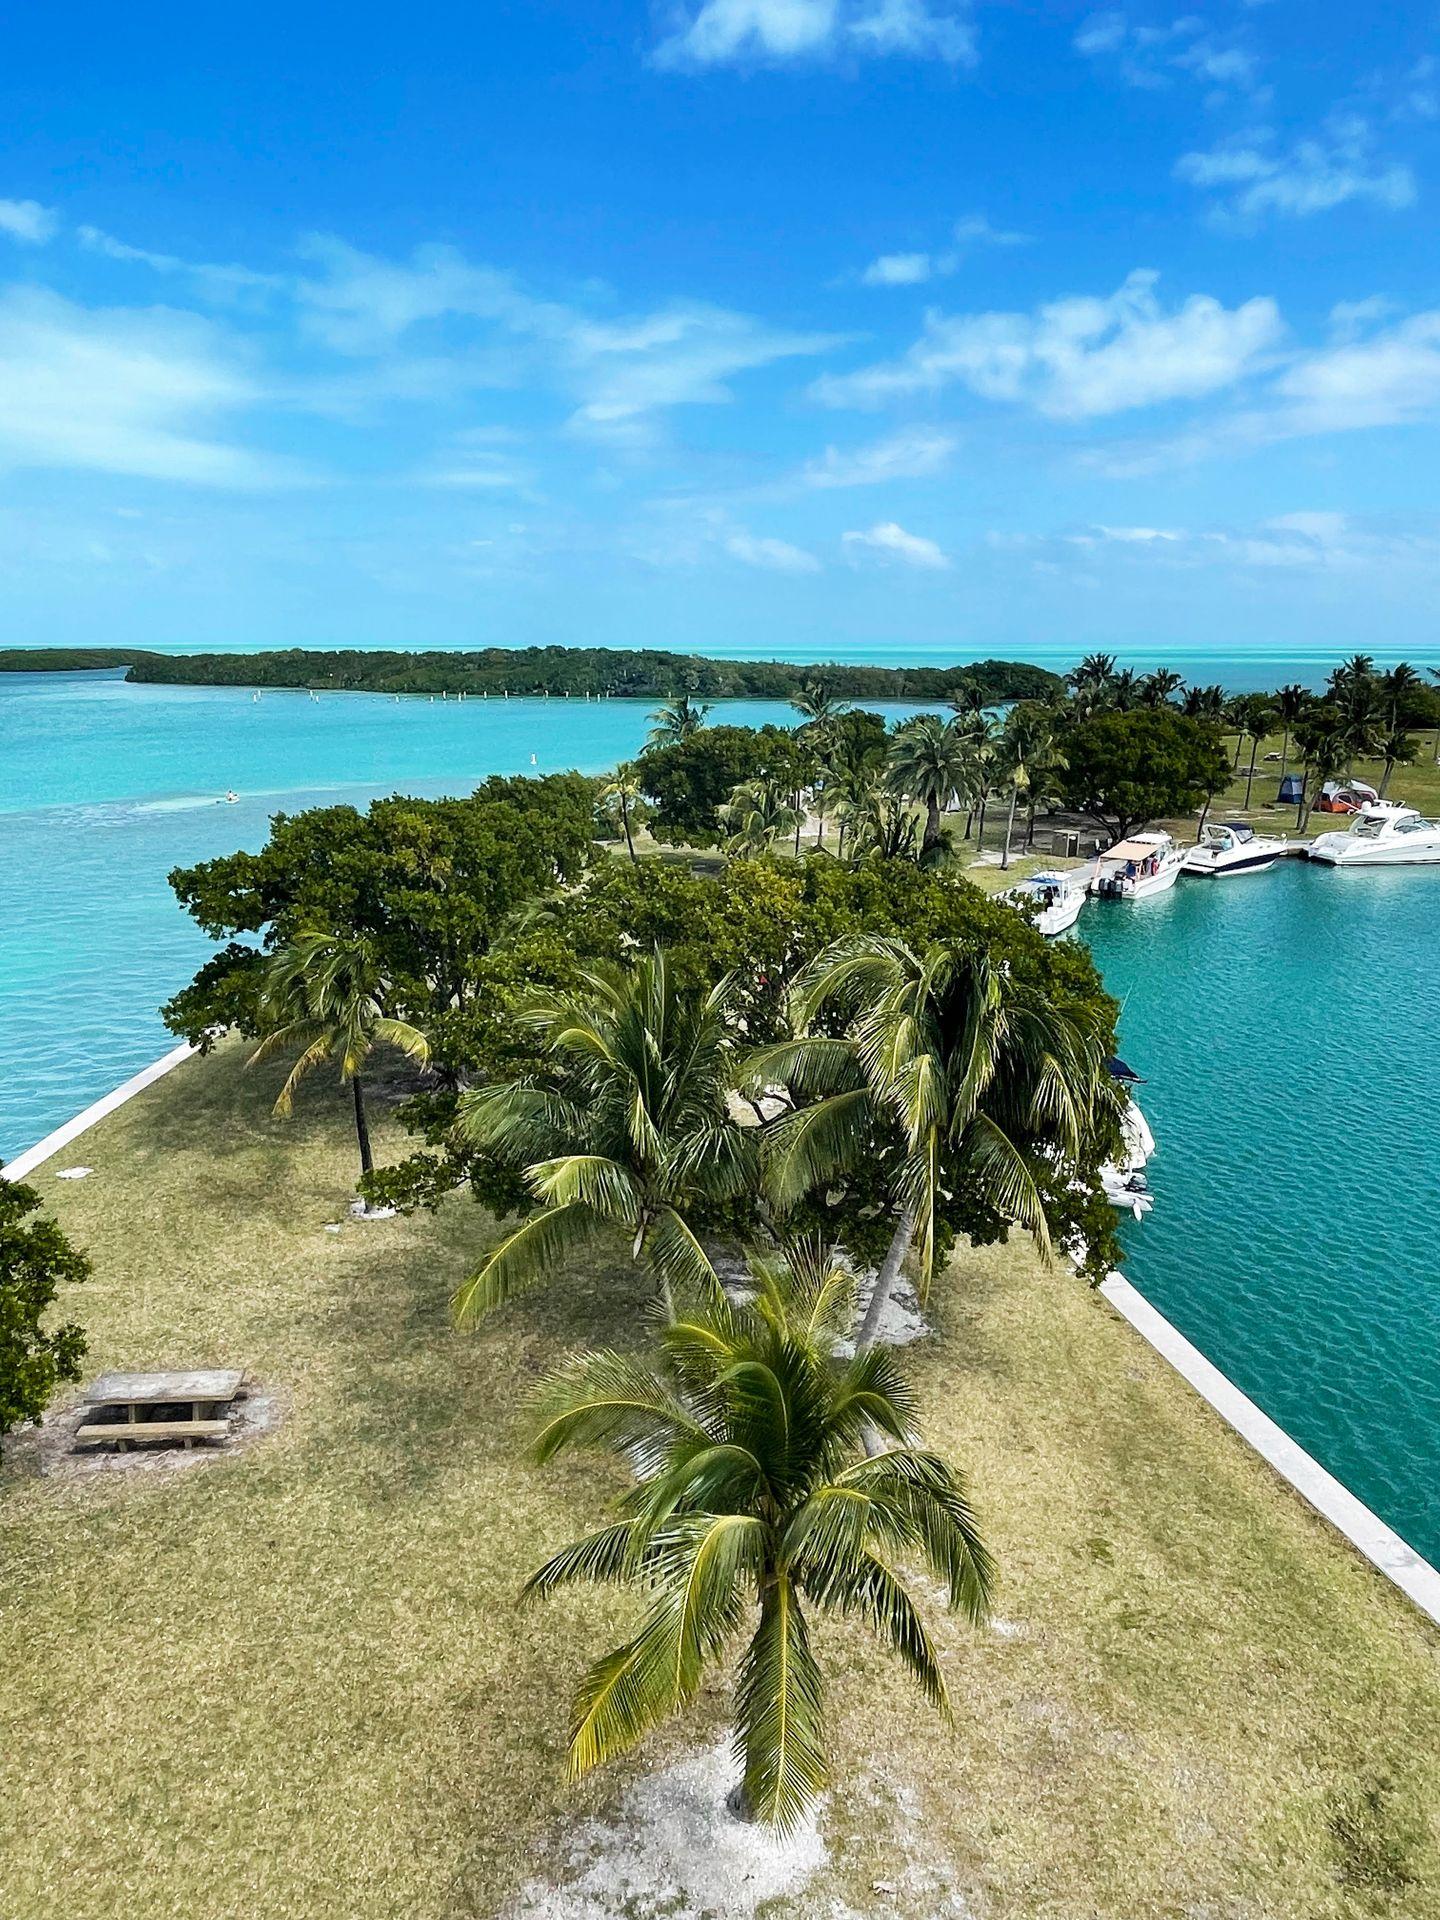 A view of Boca Chita Island from the lighthouse. There is a narrow bit of land with palm trees and bright blue water on both sides.